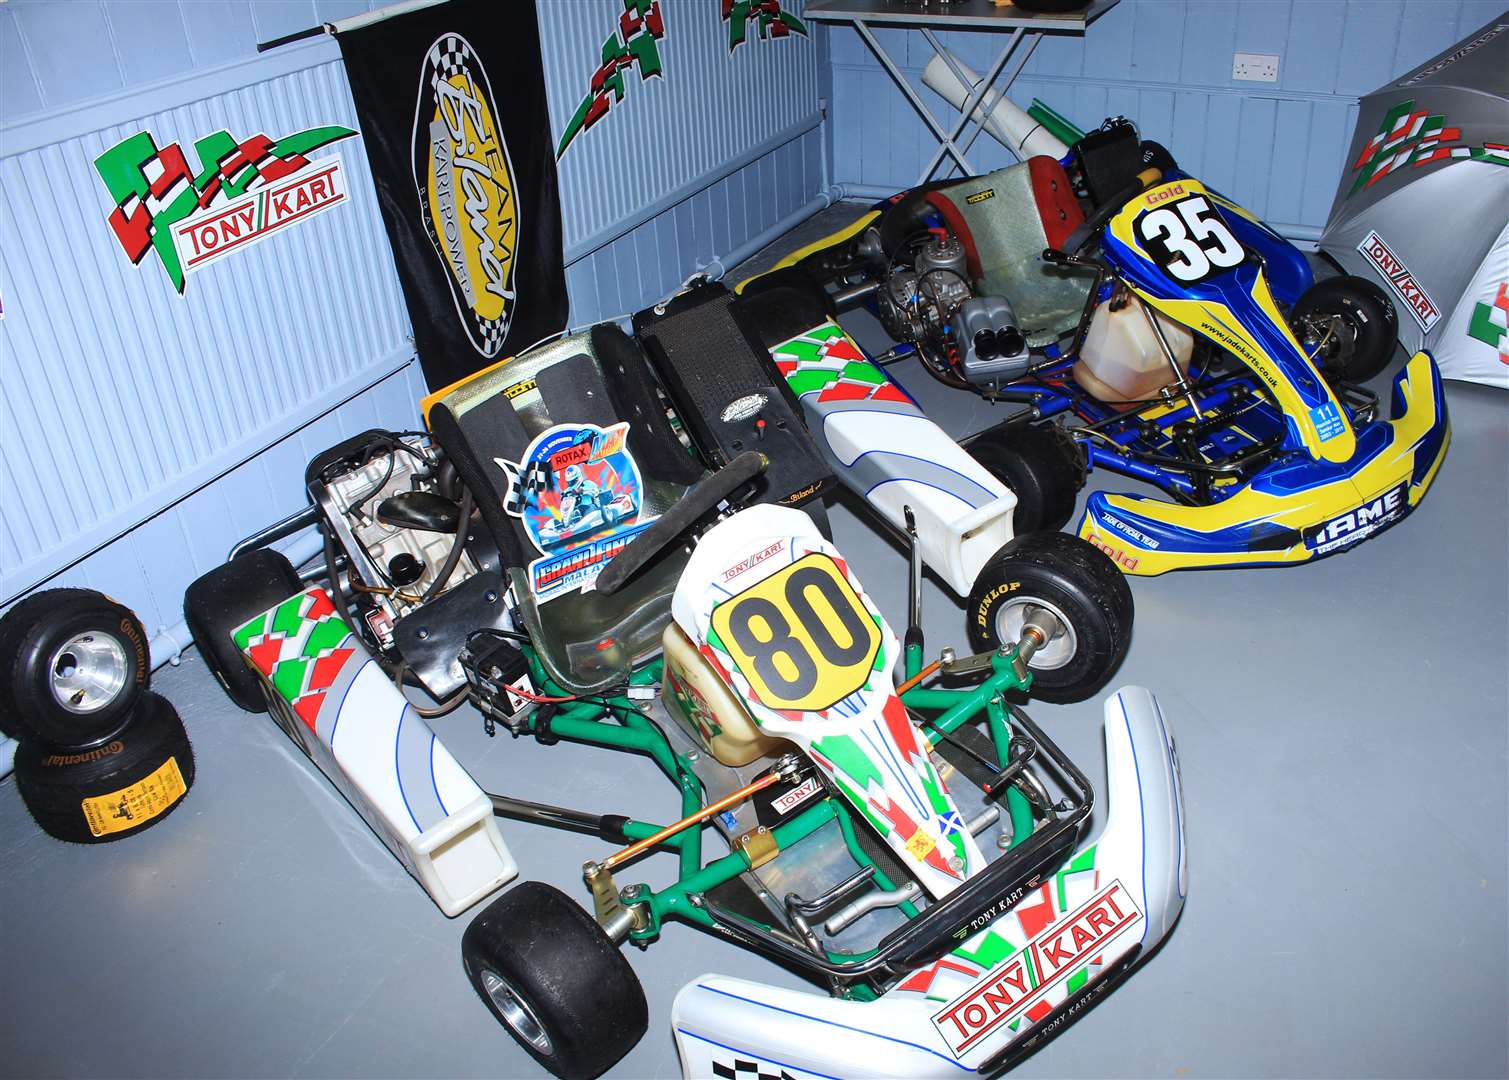 Racing karts were on display in the motoring centre. Picture: Alan Hendry